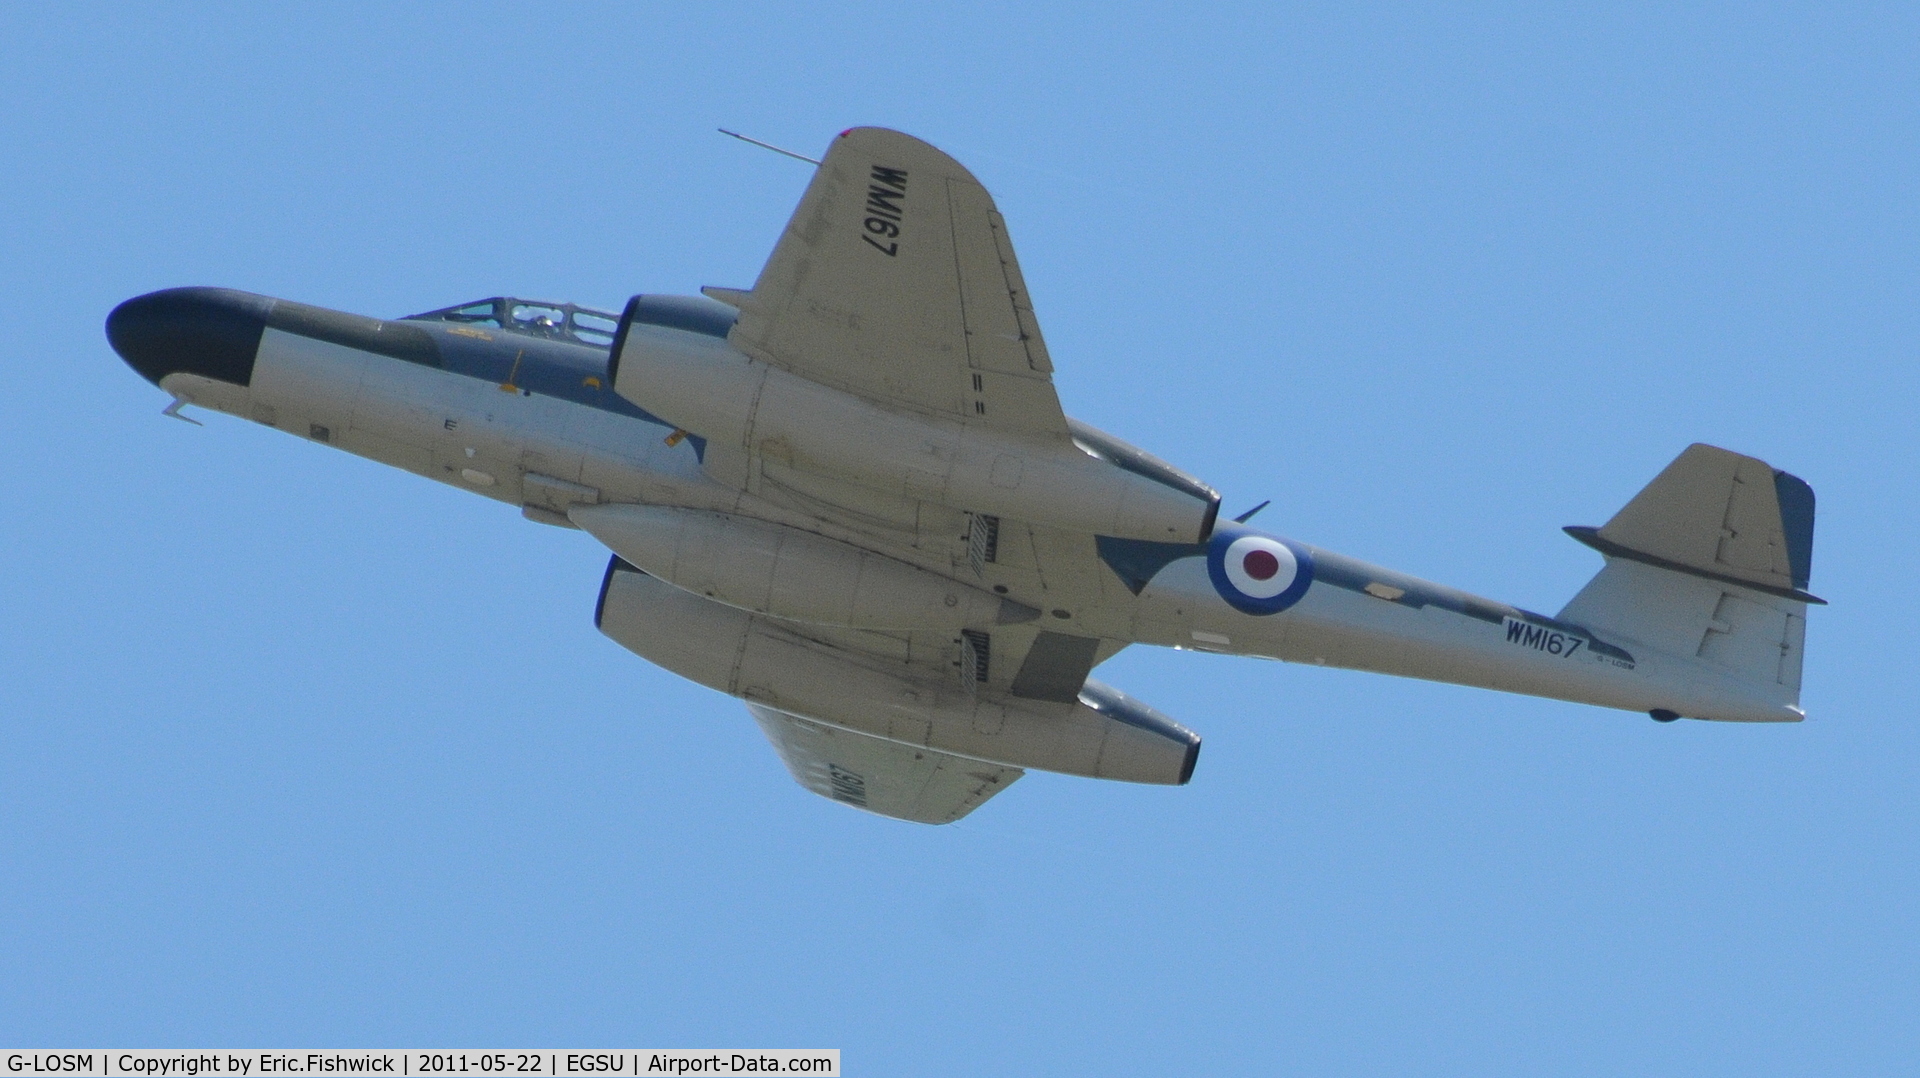 G-LOSM, 1952 Gloster Meteor NF.11 C/N S4/U/2342, 44. G-LOSM at Duxford's Spring Air Show, May 2011